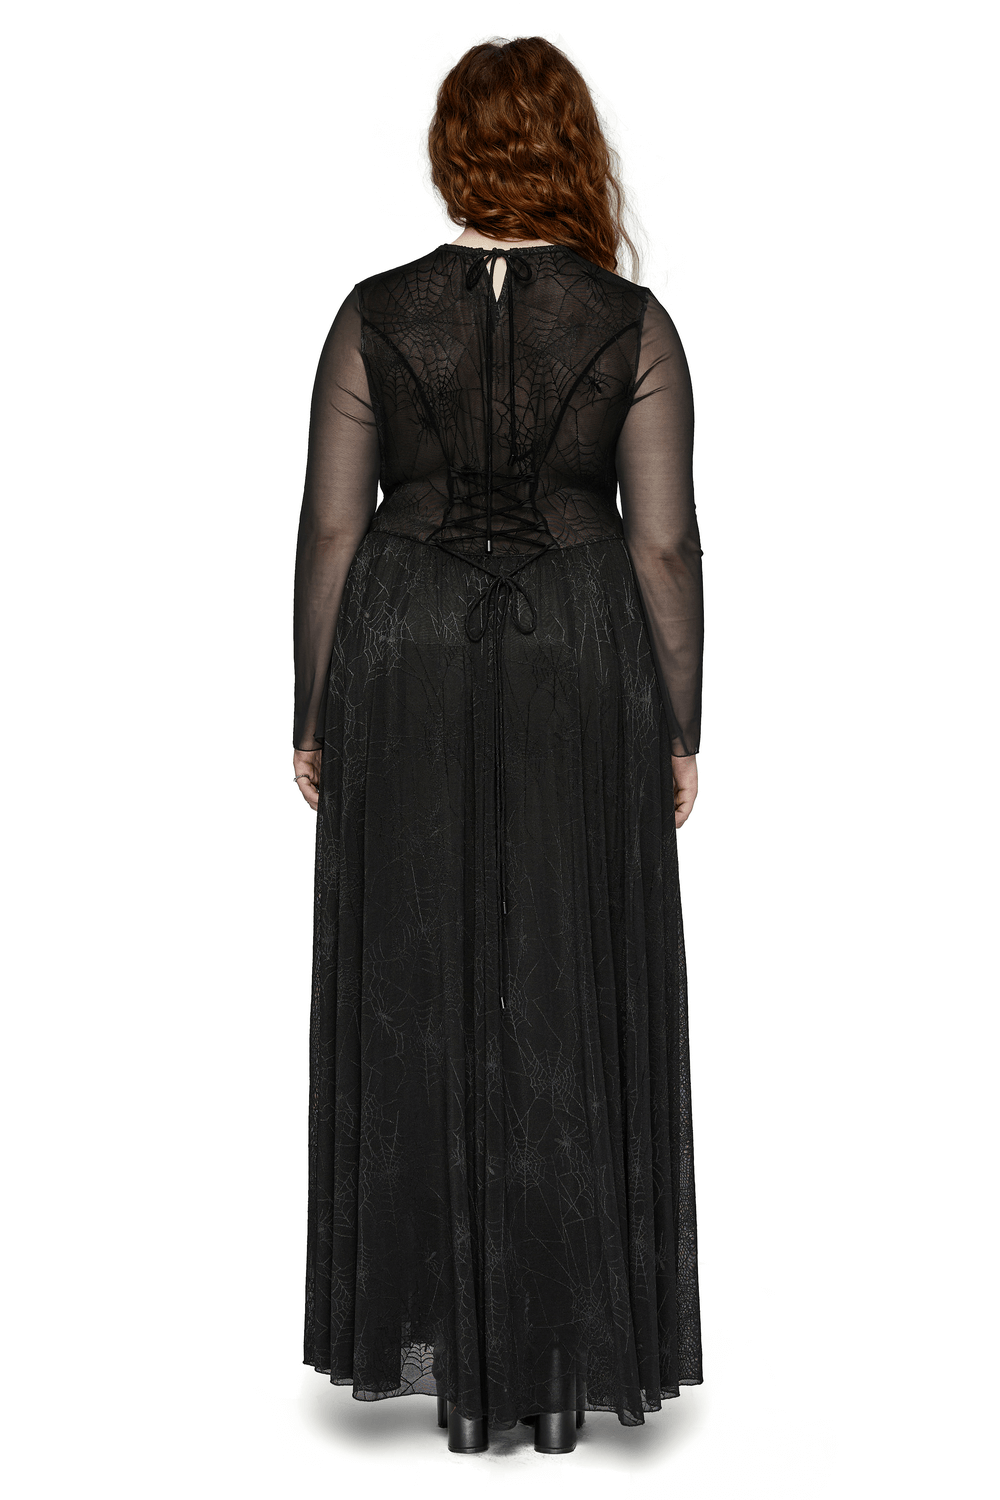 Sexy Mesh Gothic Dress with Spiderweb and Python Pattern